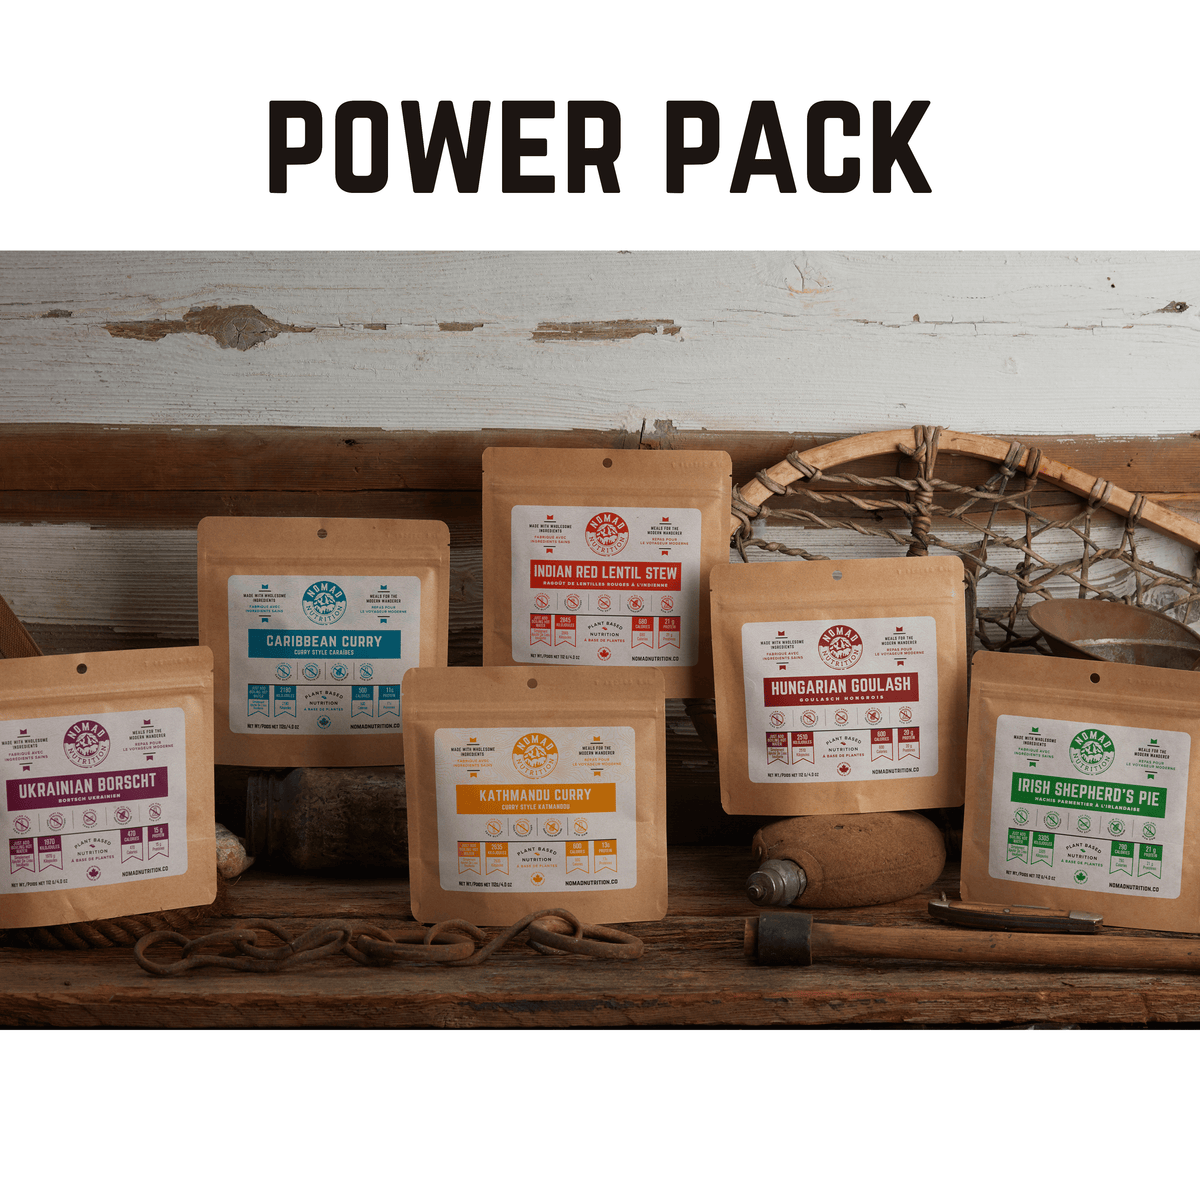 Nomad Nutrition Power Pack with 6 meal sizes 112g. From left: Ukrainian Borscht, Caribbean Curry, Kathmandu Curry, Indian Red Lentil Stew, Hungarian Goulash, Irish Shepherd&#39;s Pie.